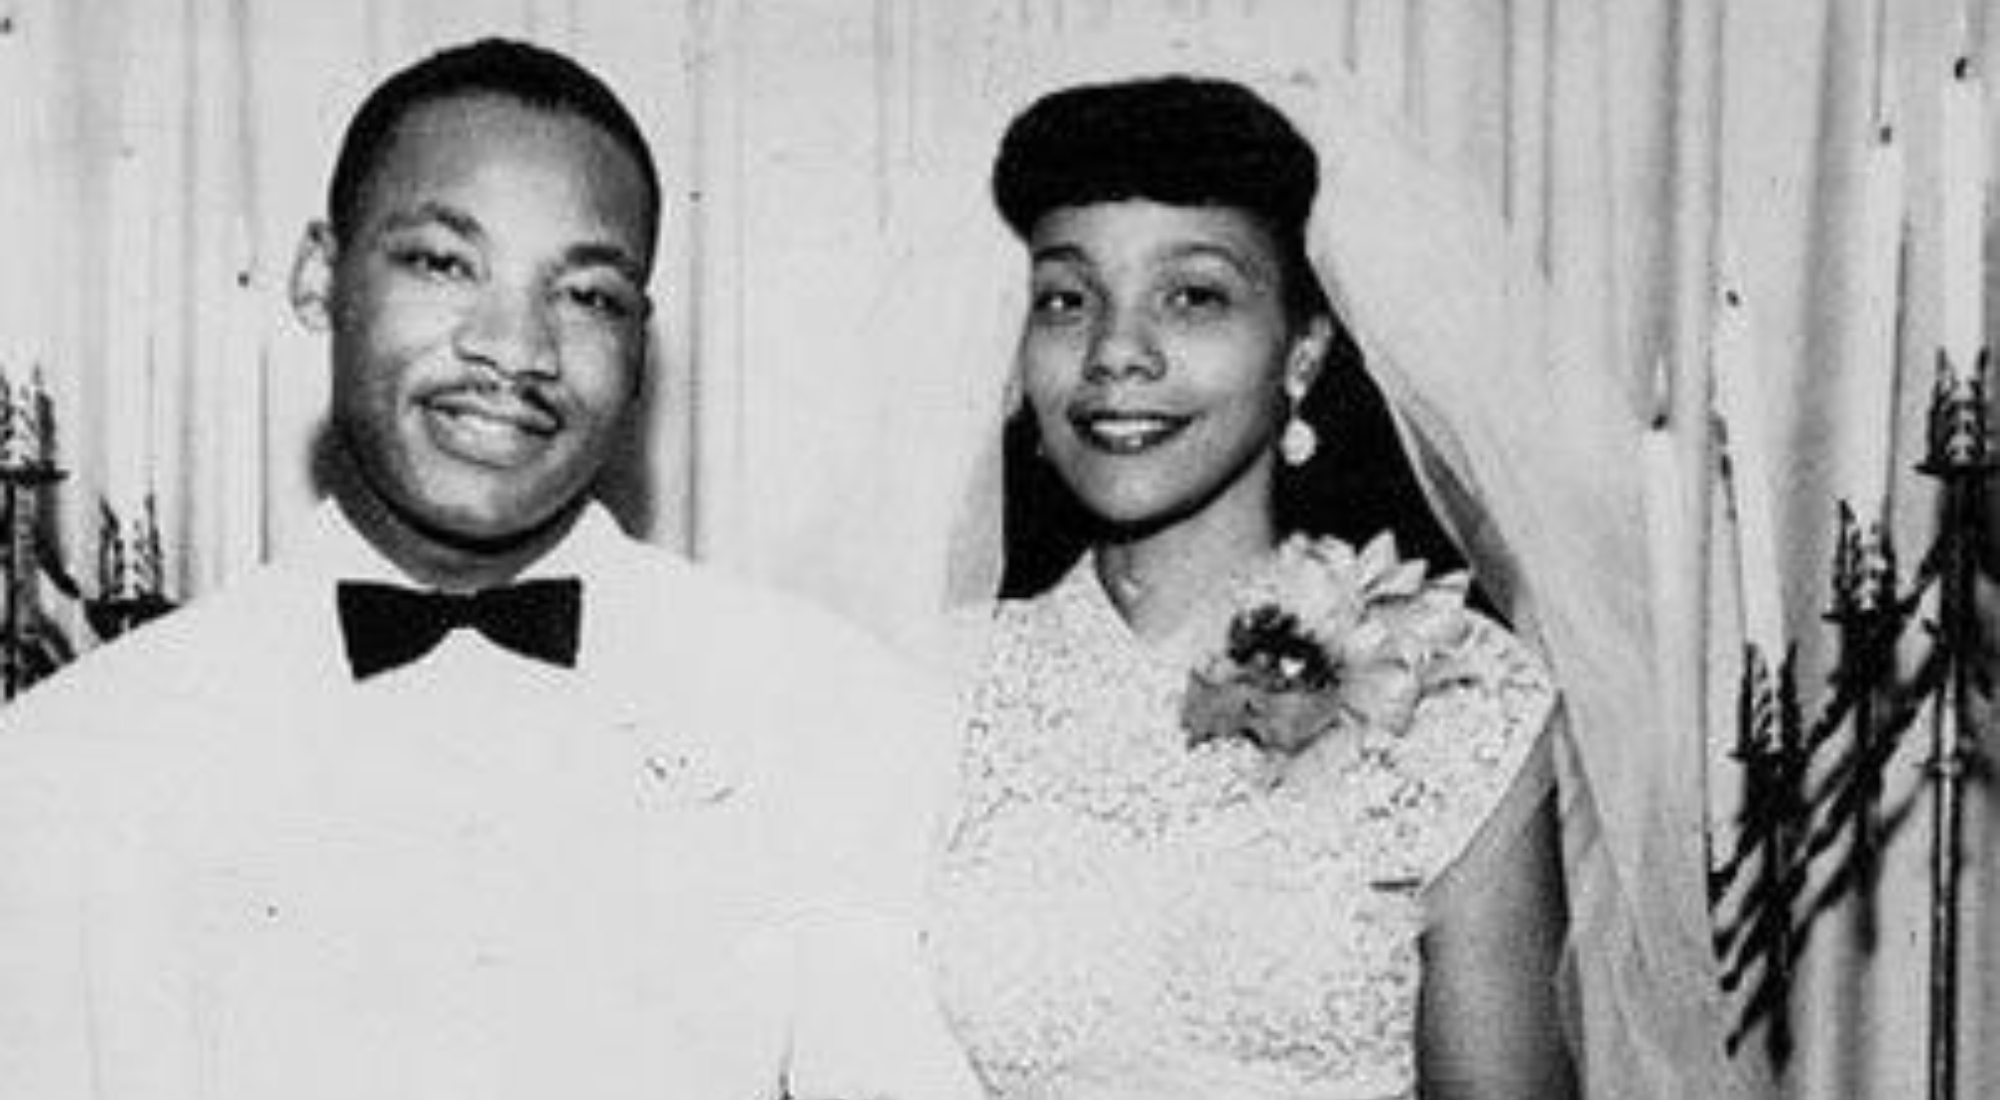 Wedding photo of Dr. Martin Luther King, Jr. and Coretta Scott King